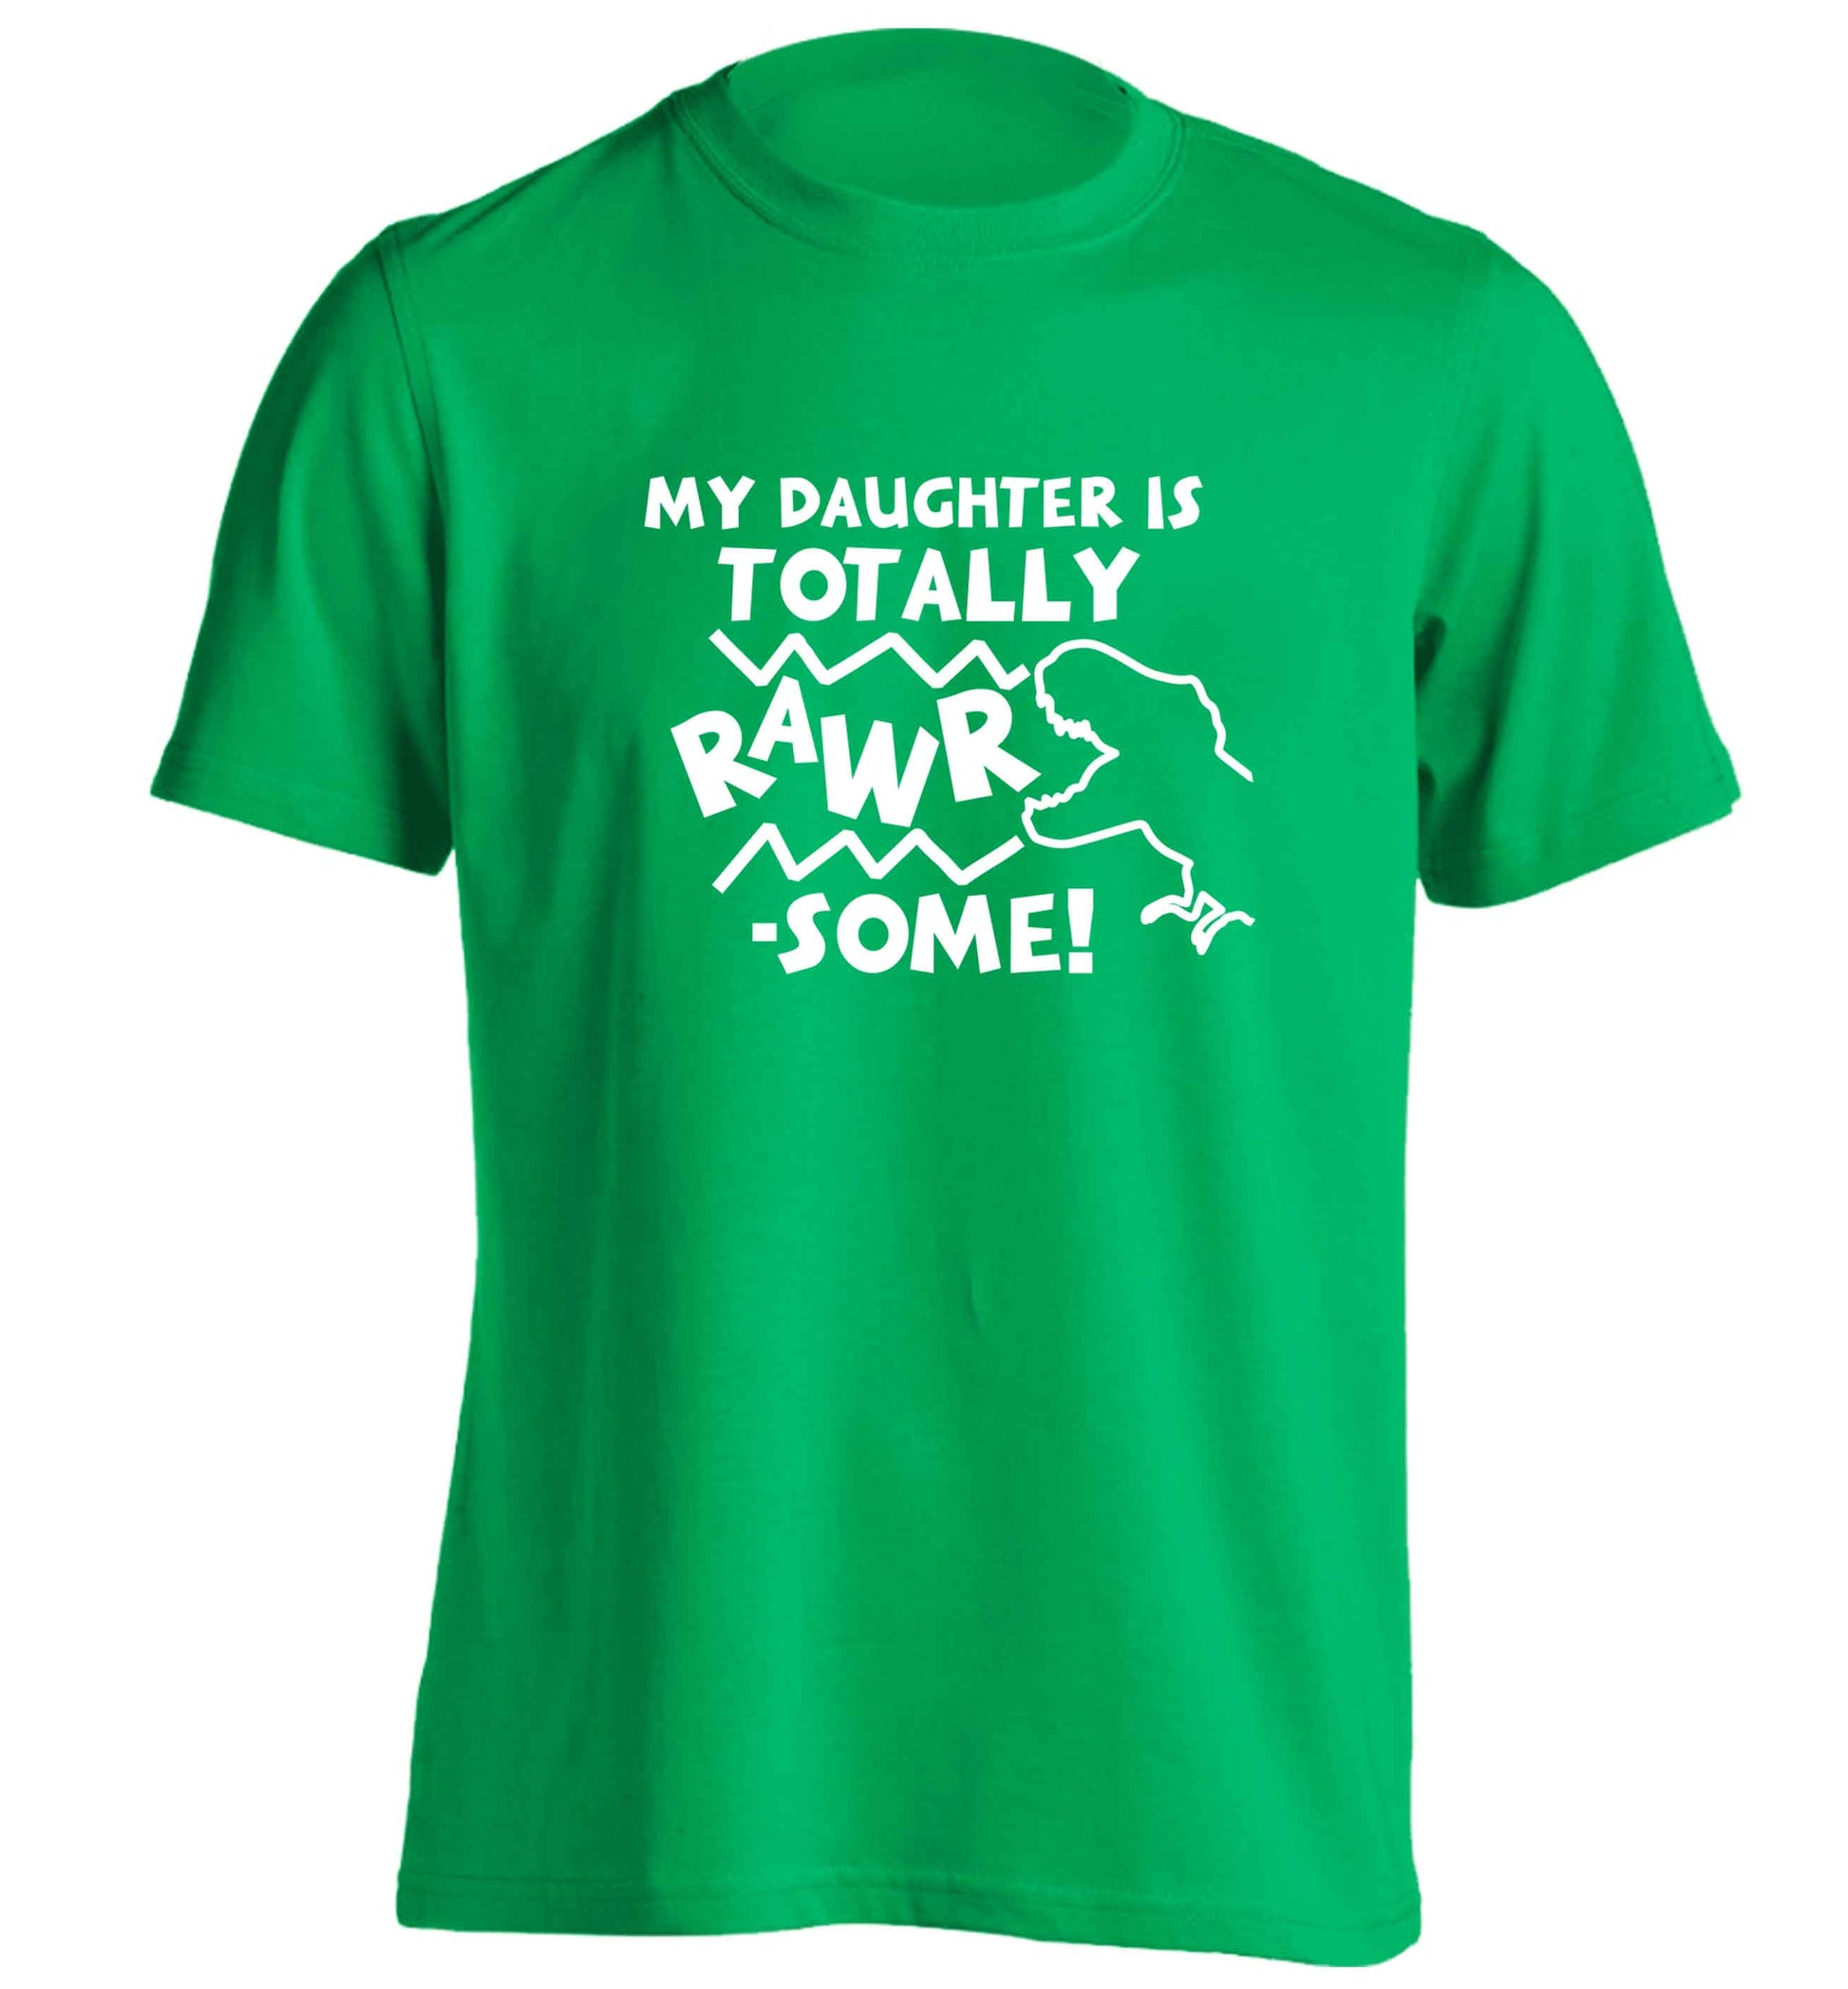 My daughter is totally rawrsome adults unisex green Tshirt small